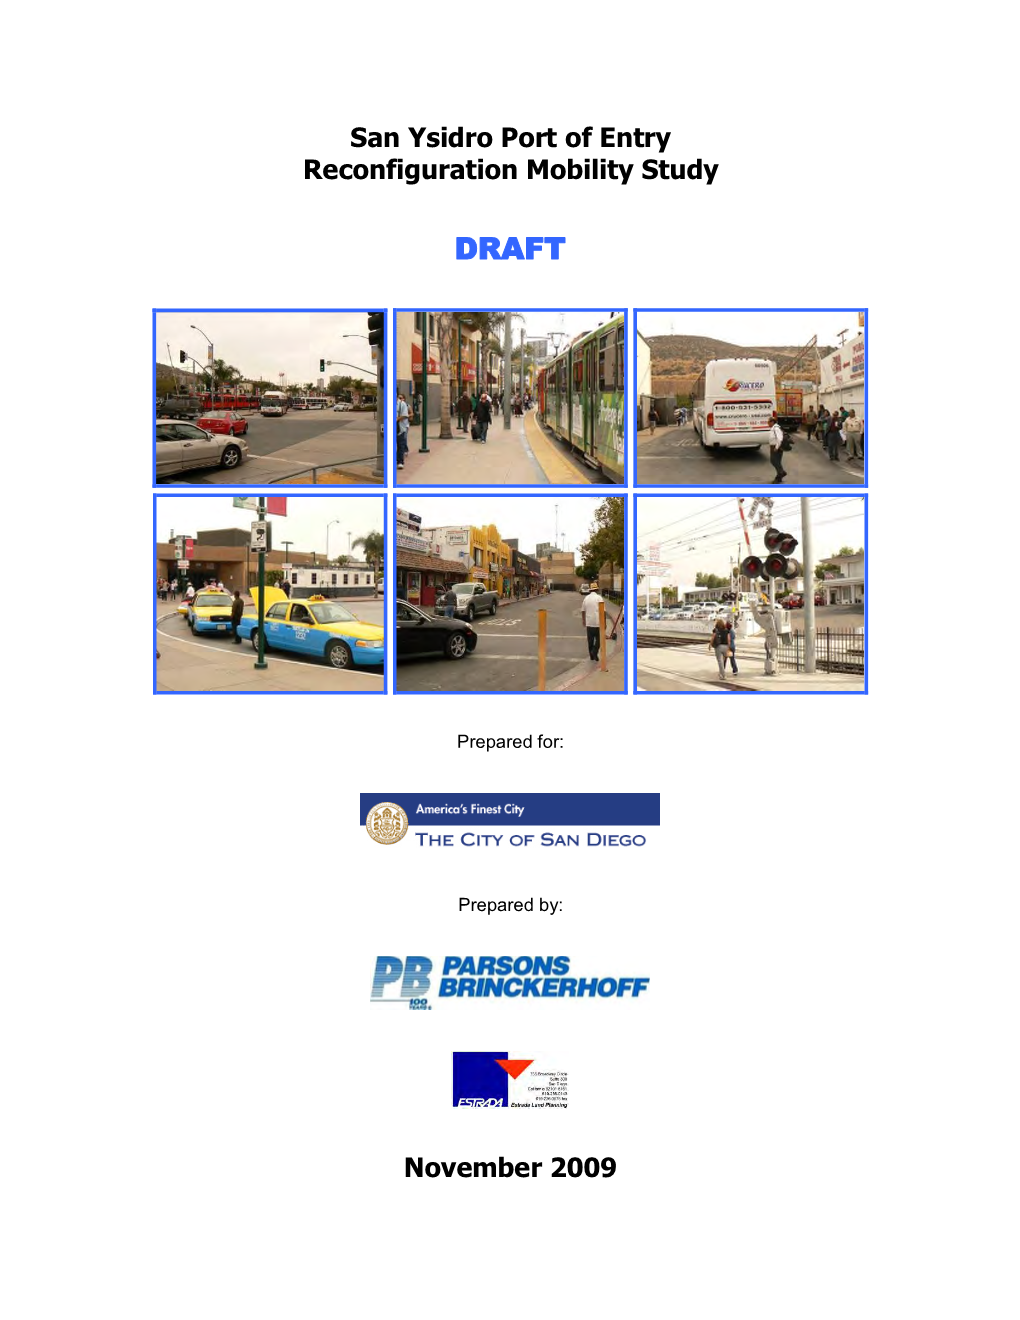 San Ysidro Port of Entry Reconfiguration Mobility Study